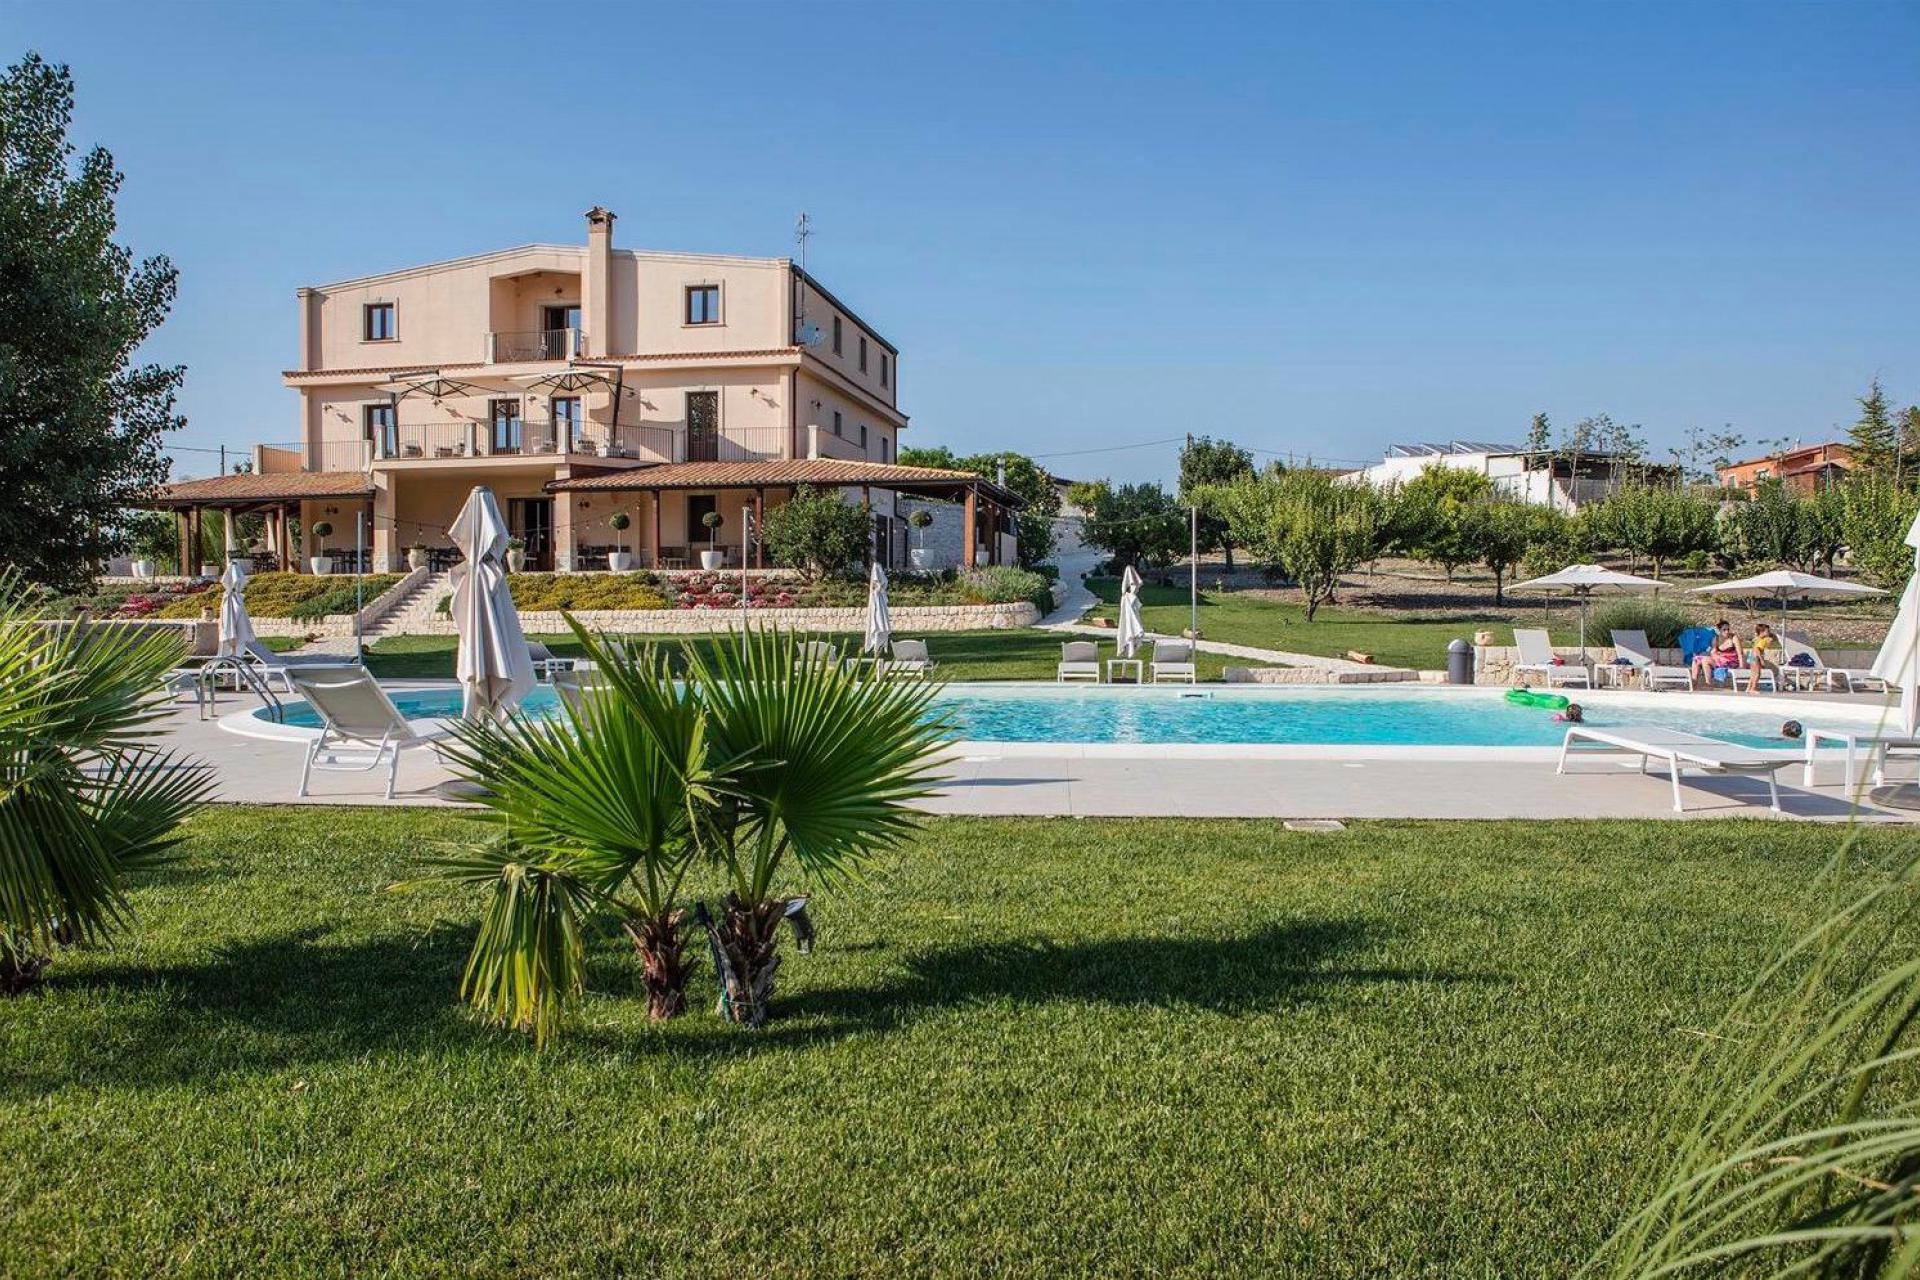 Hospitable, child-friendly agriturismo in Sicily